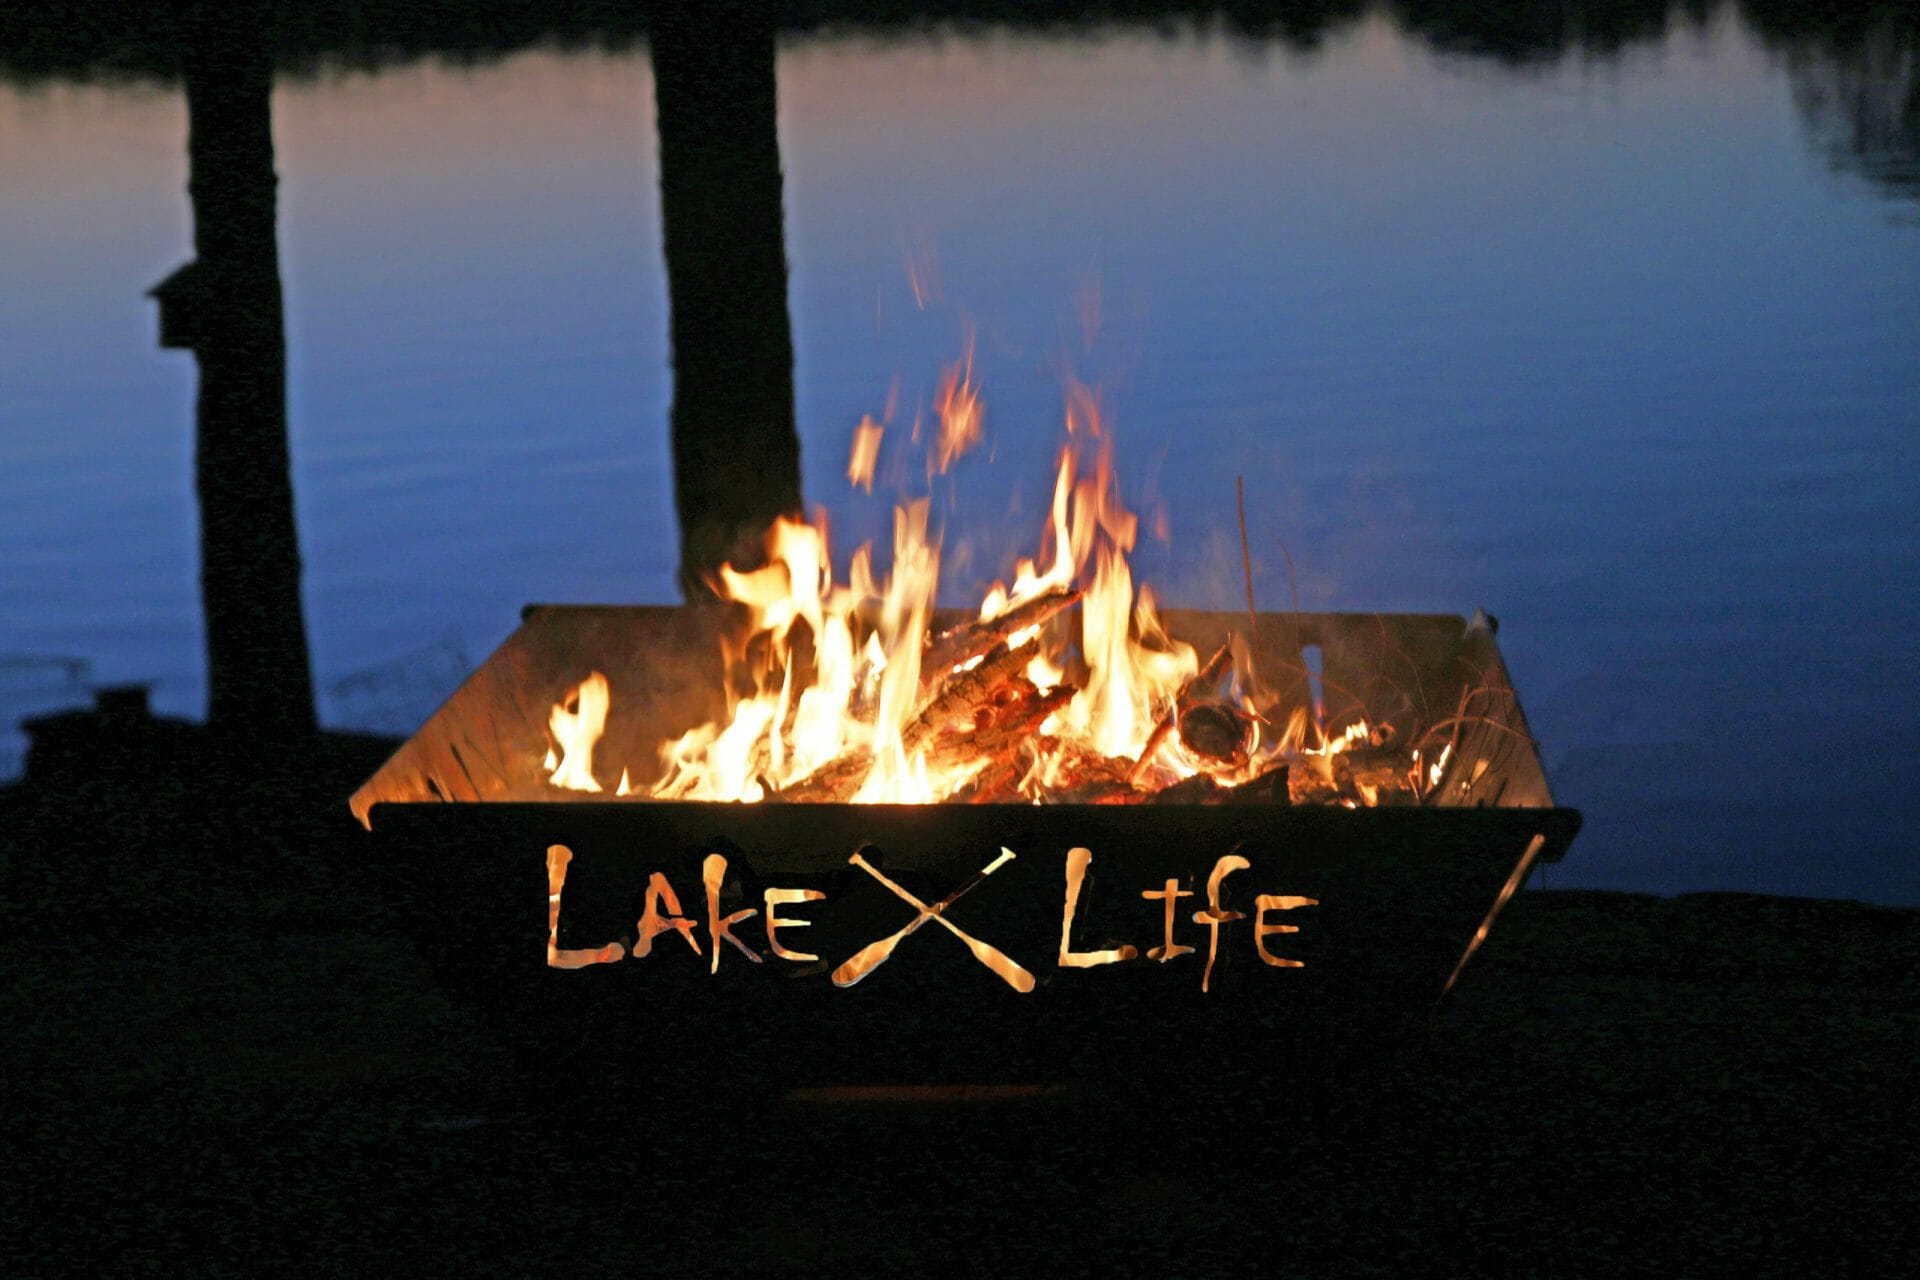 Lake Life Fire Pit A Graphic Dies, Fire Pit By Lake